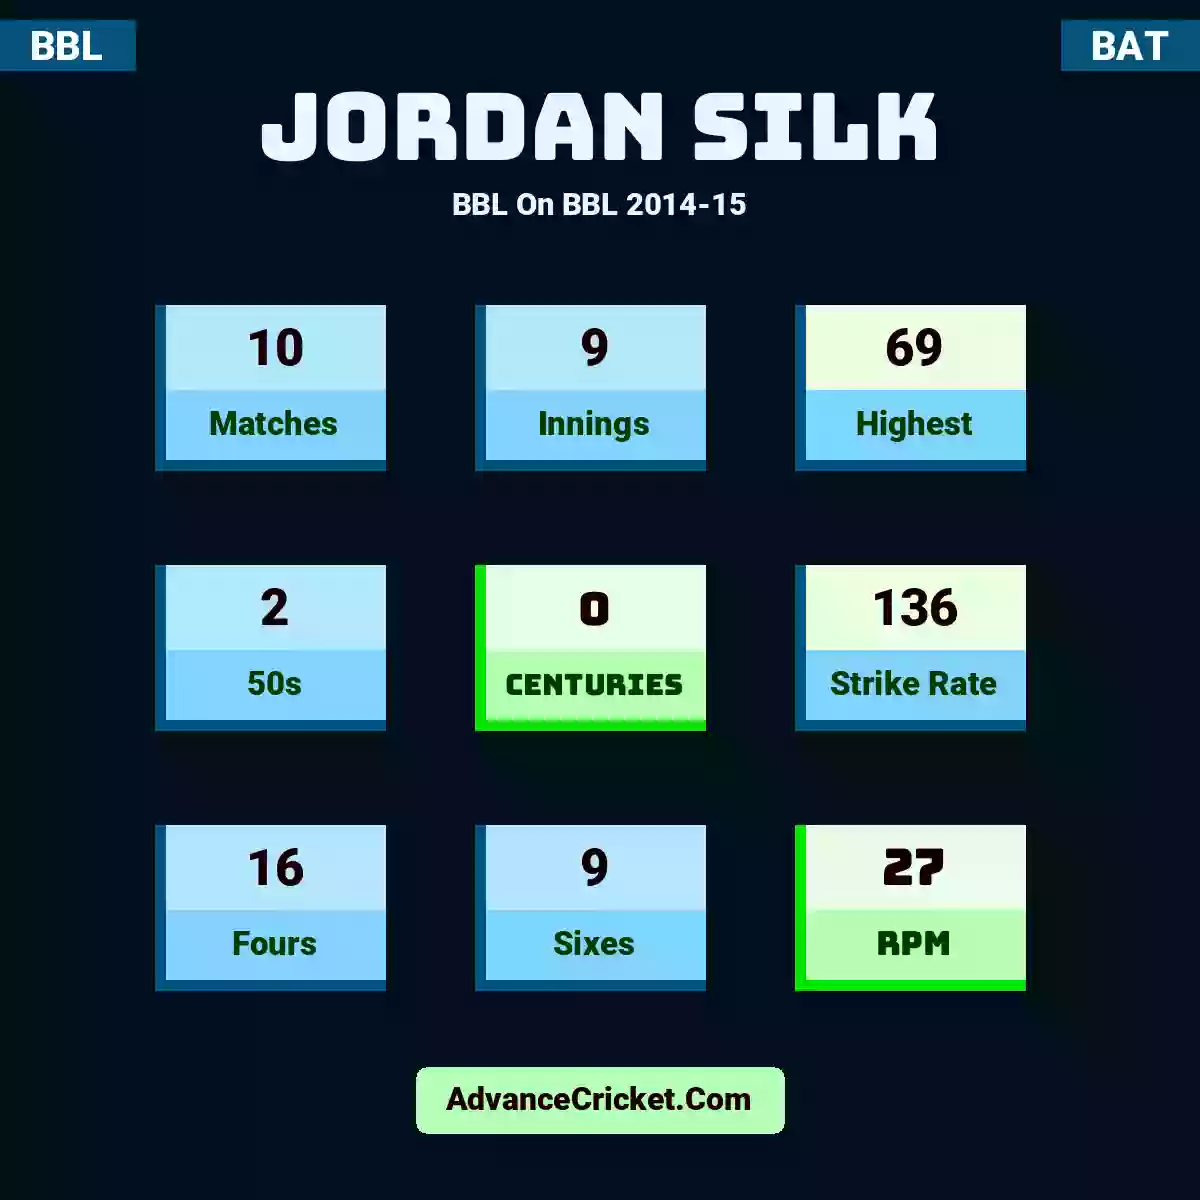 Jordan Silk BBL  On BBL 2014-15, Jordan Silk played 10 matches, scored 69 runs as highest, 2 half-centuries, and 0 centuries, with a strike rate of 136. J.Silk hit 16 fours and 9 sixes, with an RPM of 27.